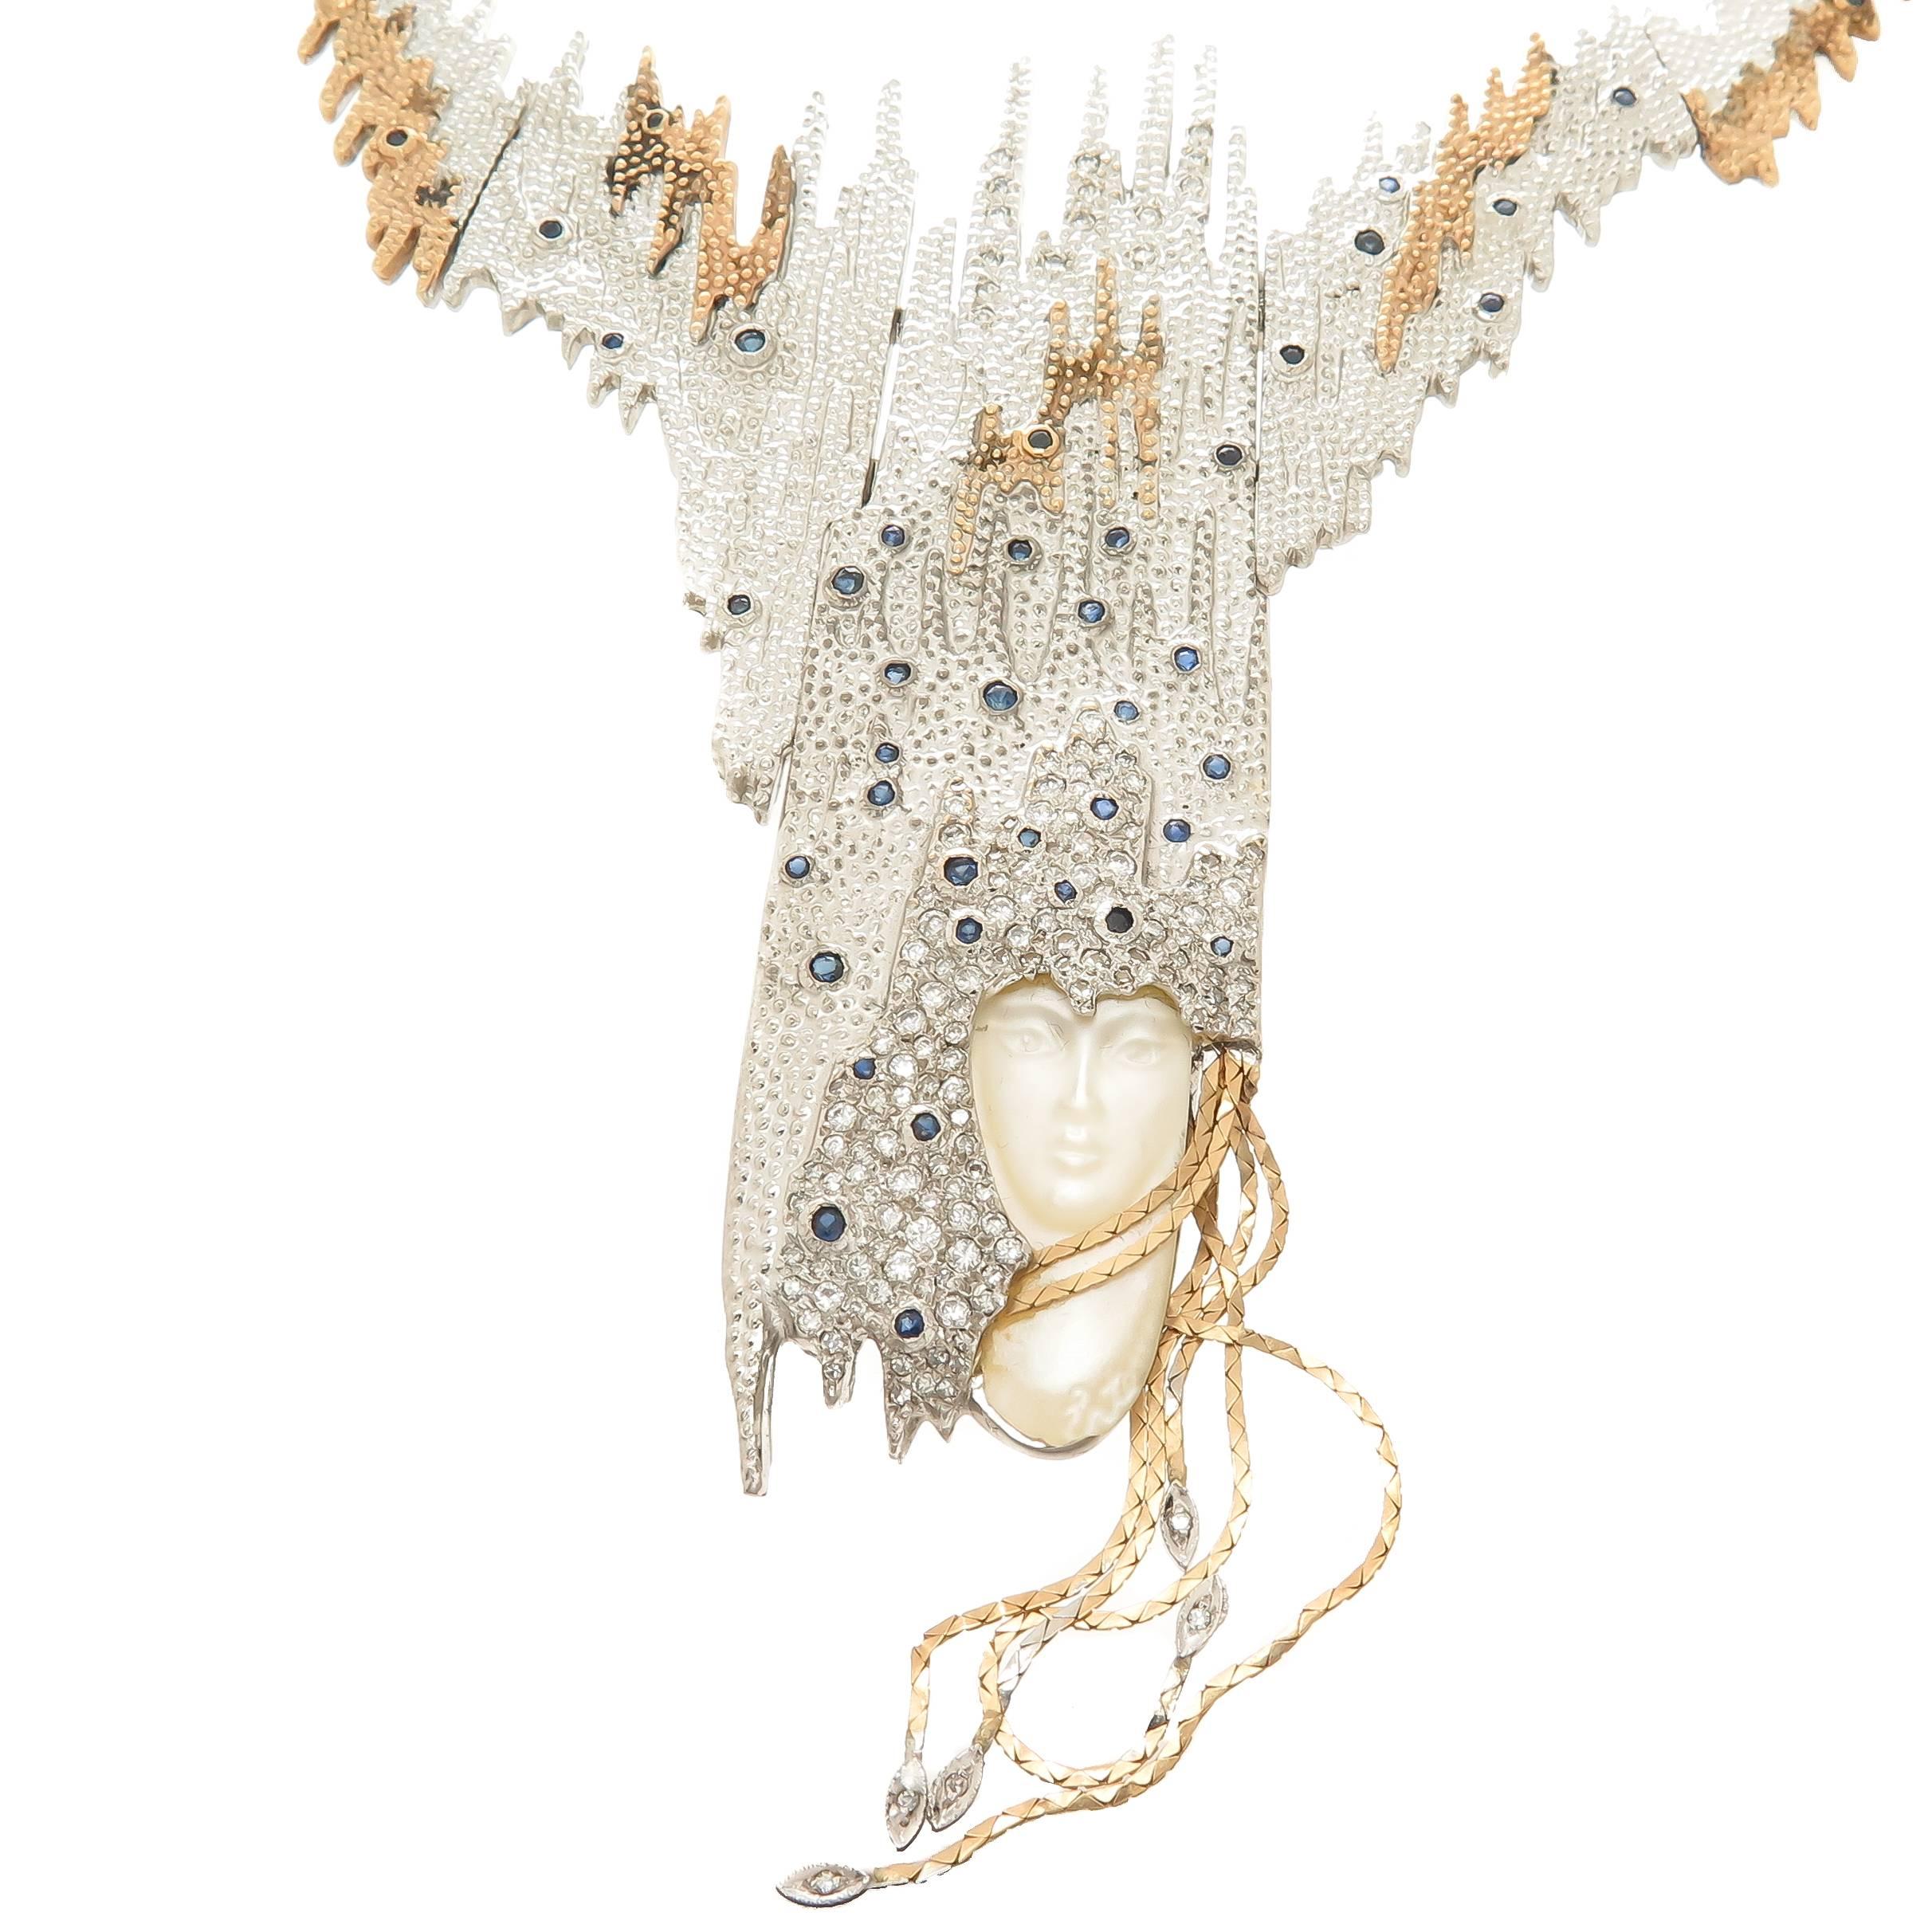 circa 1984 Sophistication Necklace by Erte, 14K Yellow Gold and Sterling Silver, Finely textured and having Granulation work throughout, set with Numerous Diamonds, Sapphires and a Carved Face of Mother Of Pearl. This Piece converts into a large